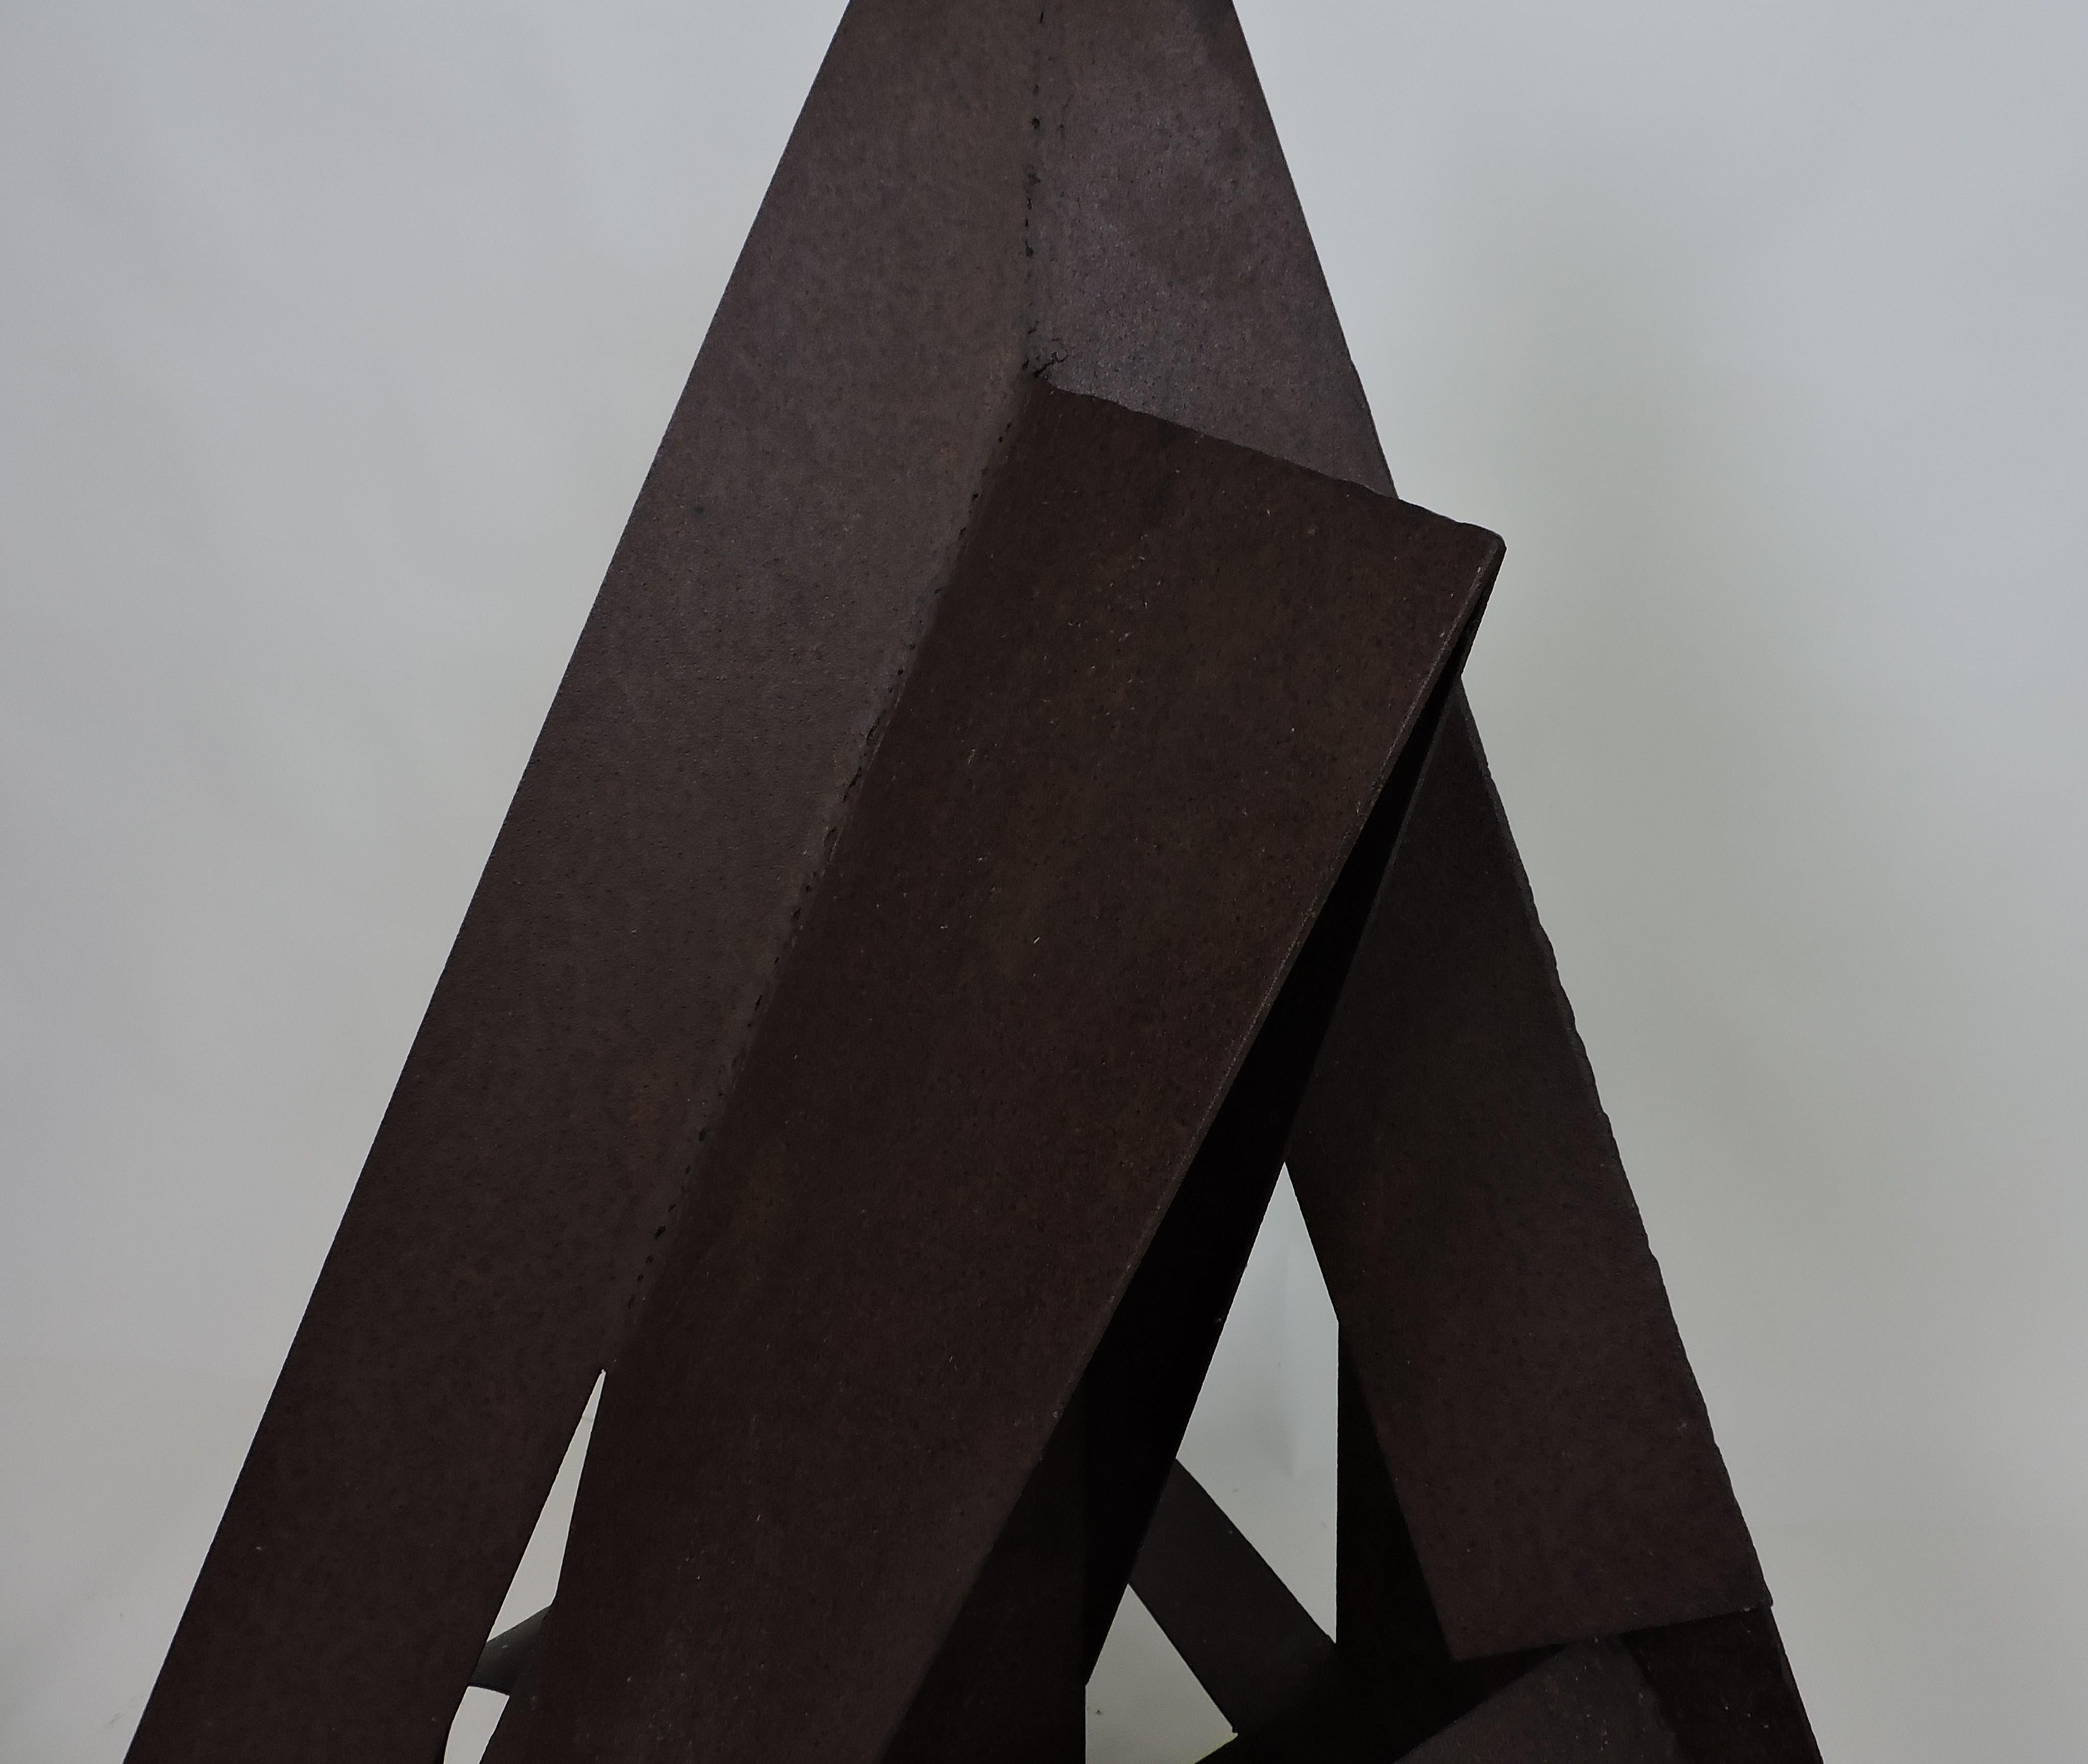 Intricate multi-dimensional Industrial style welded steel sculpture by Philadelphia based artist David Tothero. This piece has strong graphic and textural imagery and is signed by the artist in the lower corner. It's 40 inches high and is suitable